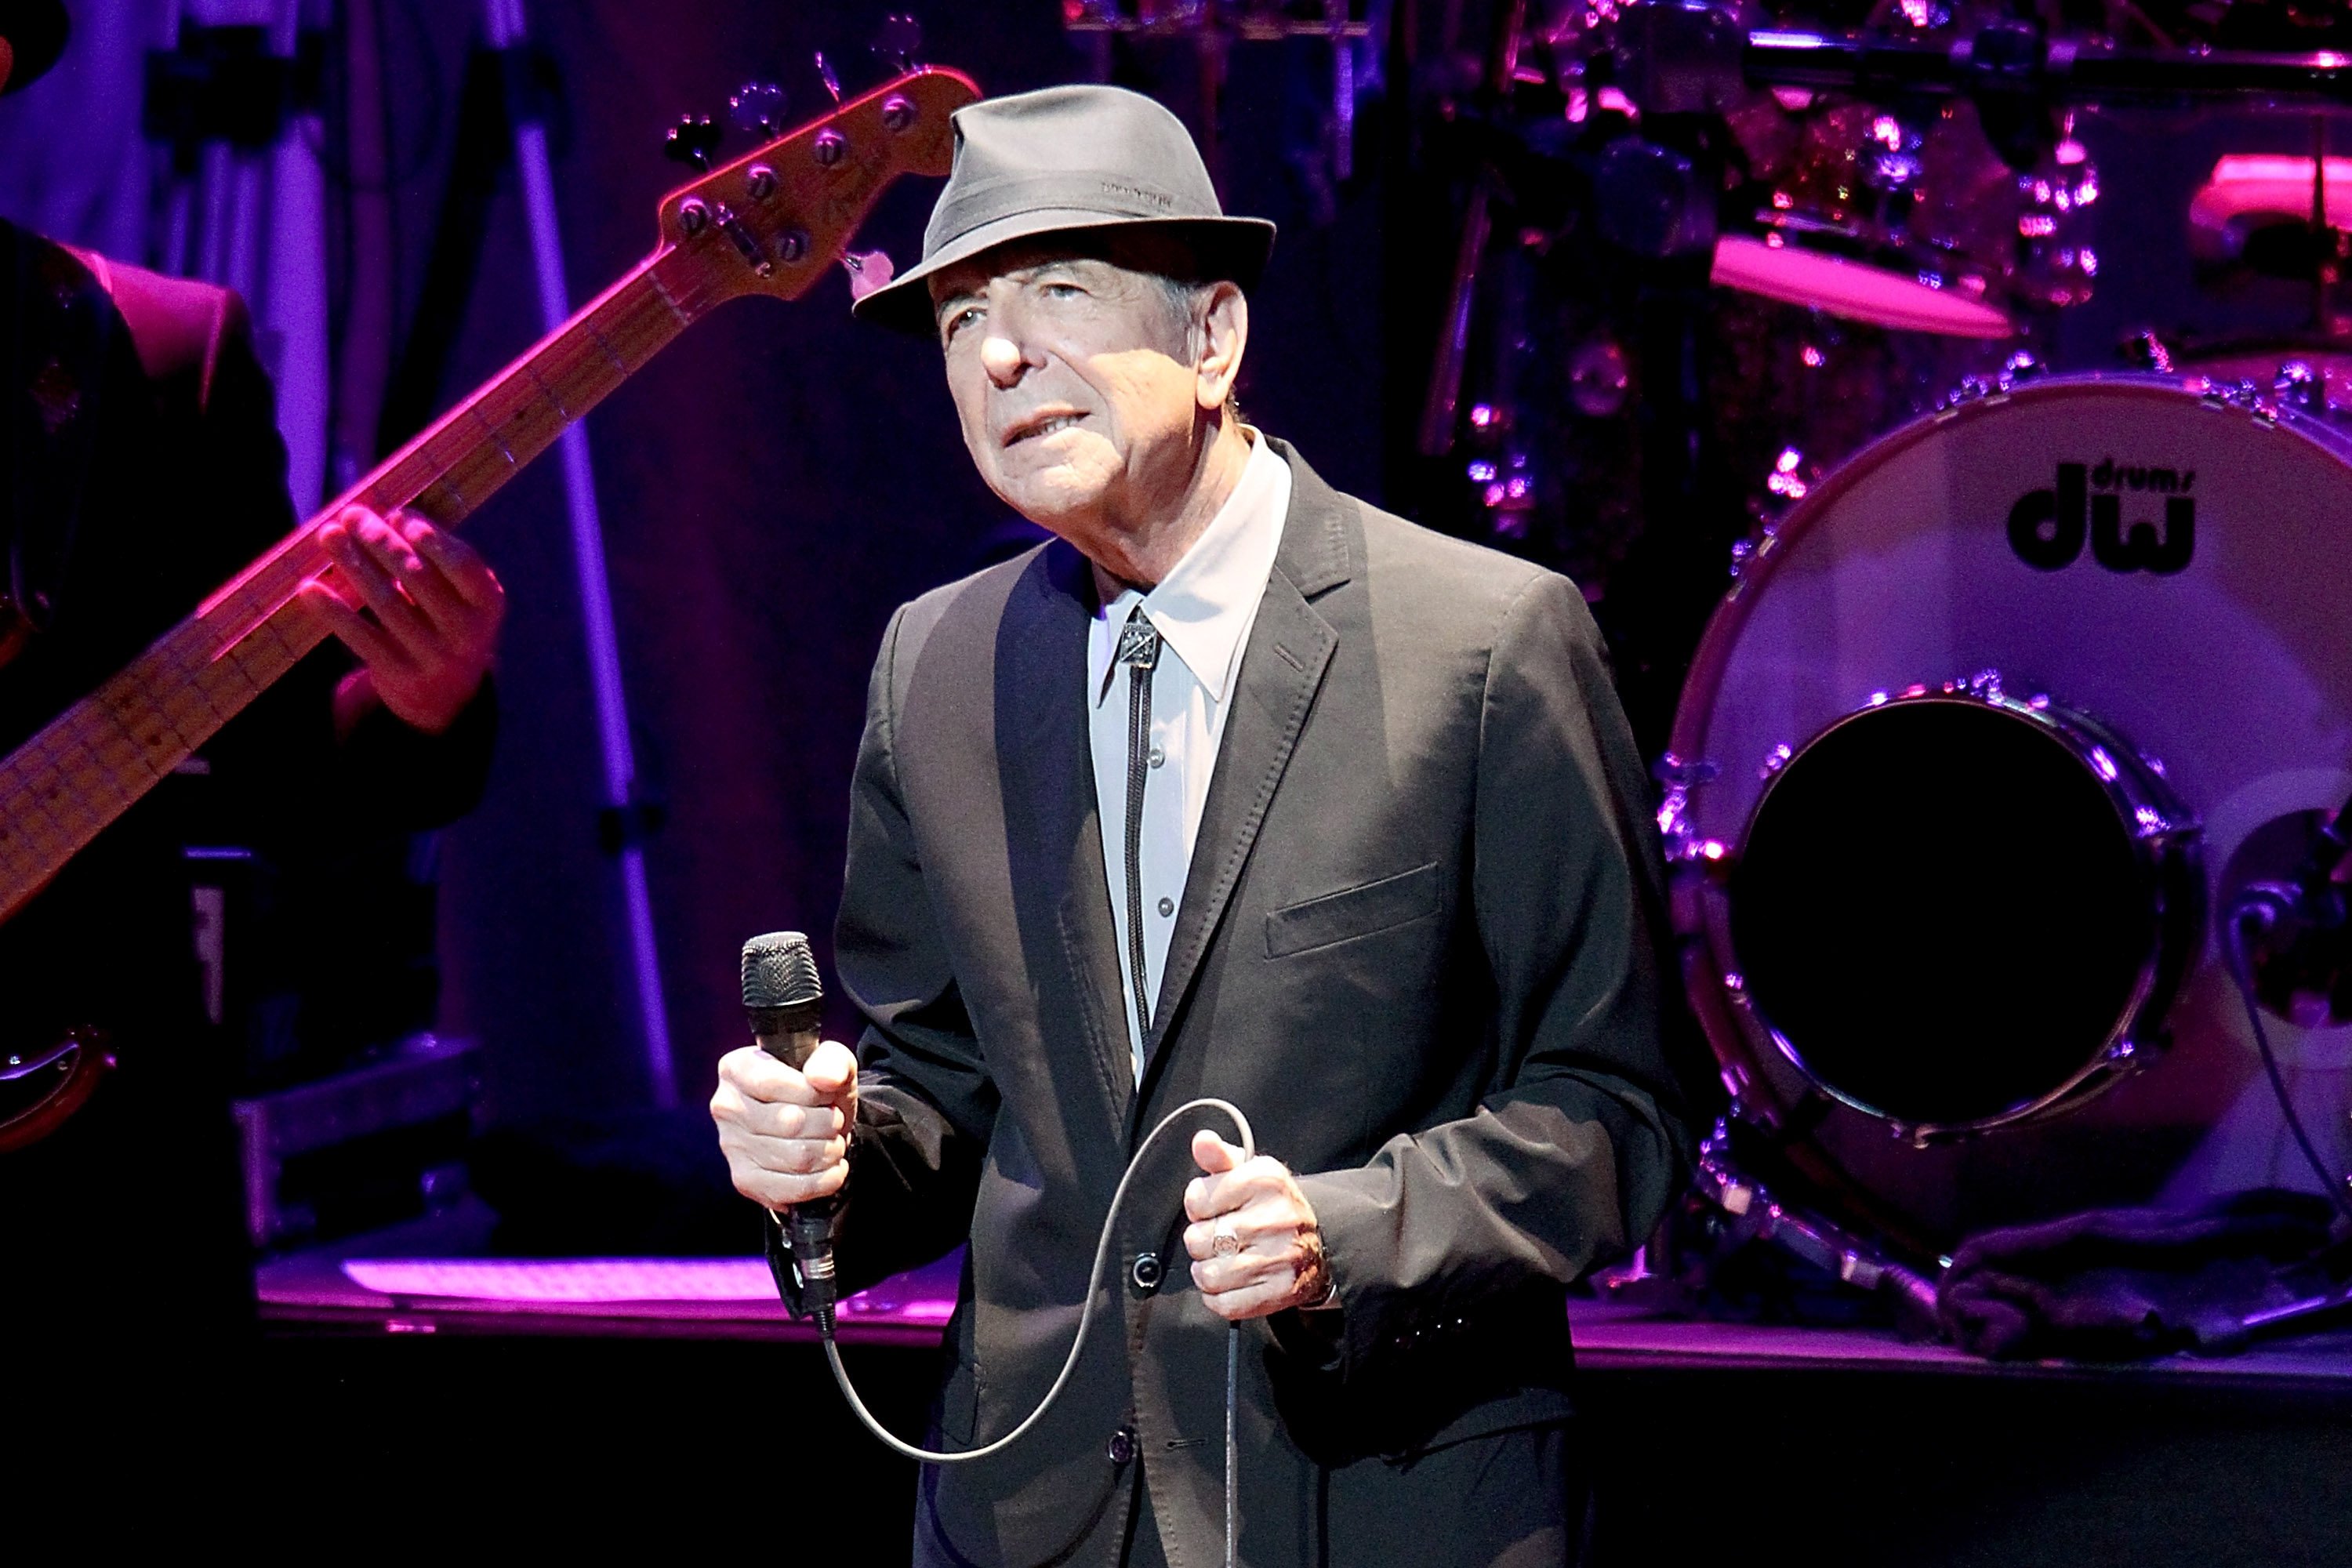 Poems written by Leonard Cohen (above) during his time in a monastery were turned into a collaborative stage show, Book of Longing, with Philip Glass in 2007. The show is being revived for Hong Kong audiences. Photo: FilmMagic